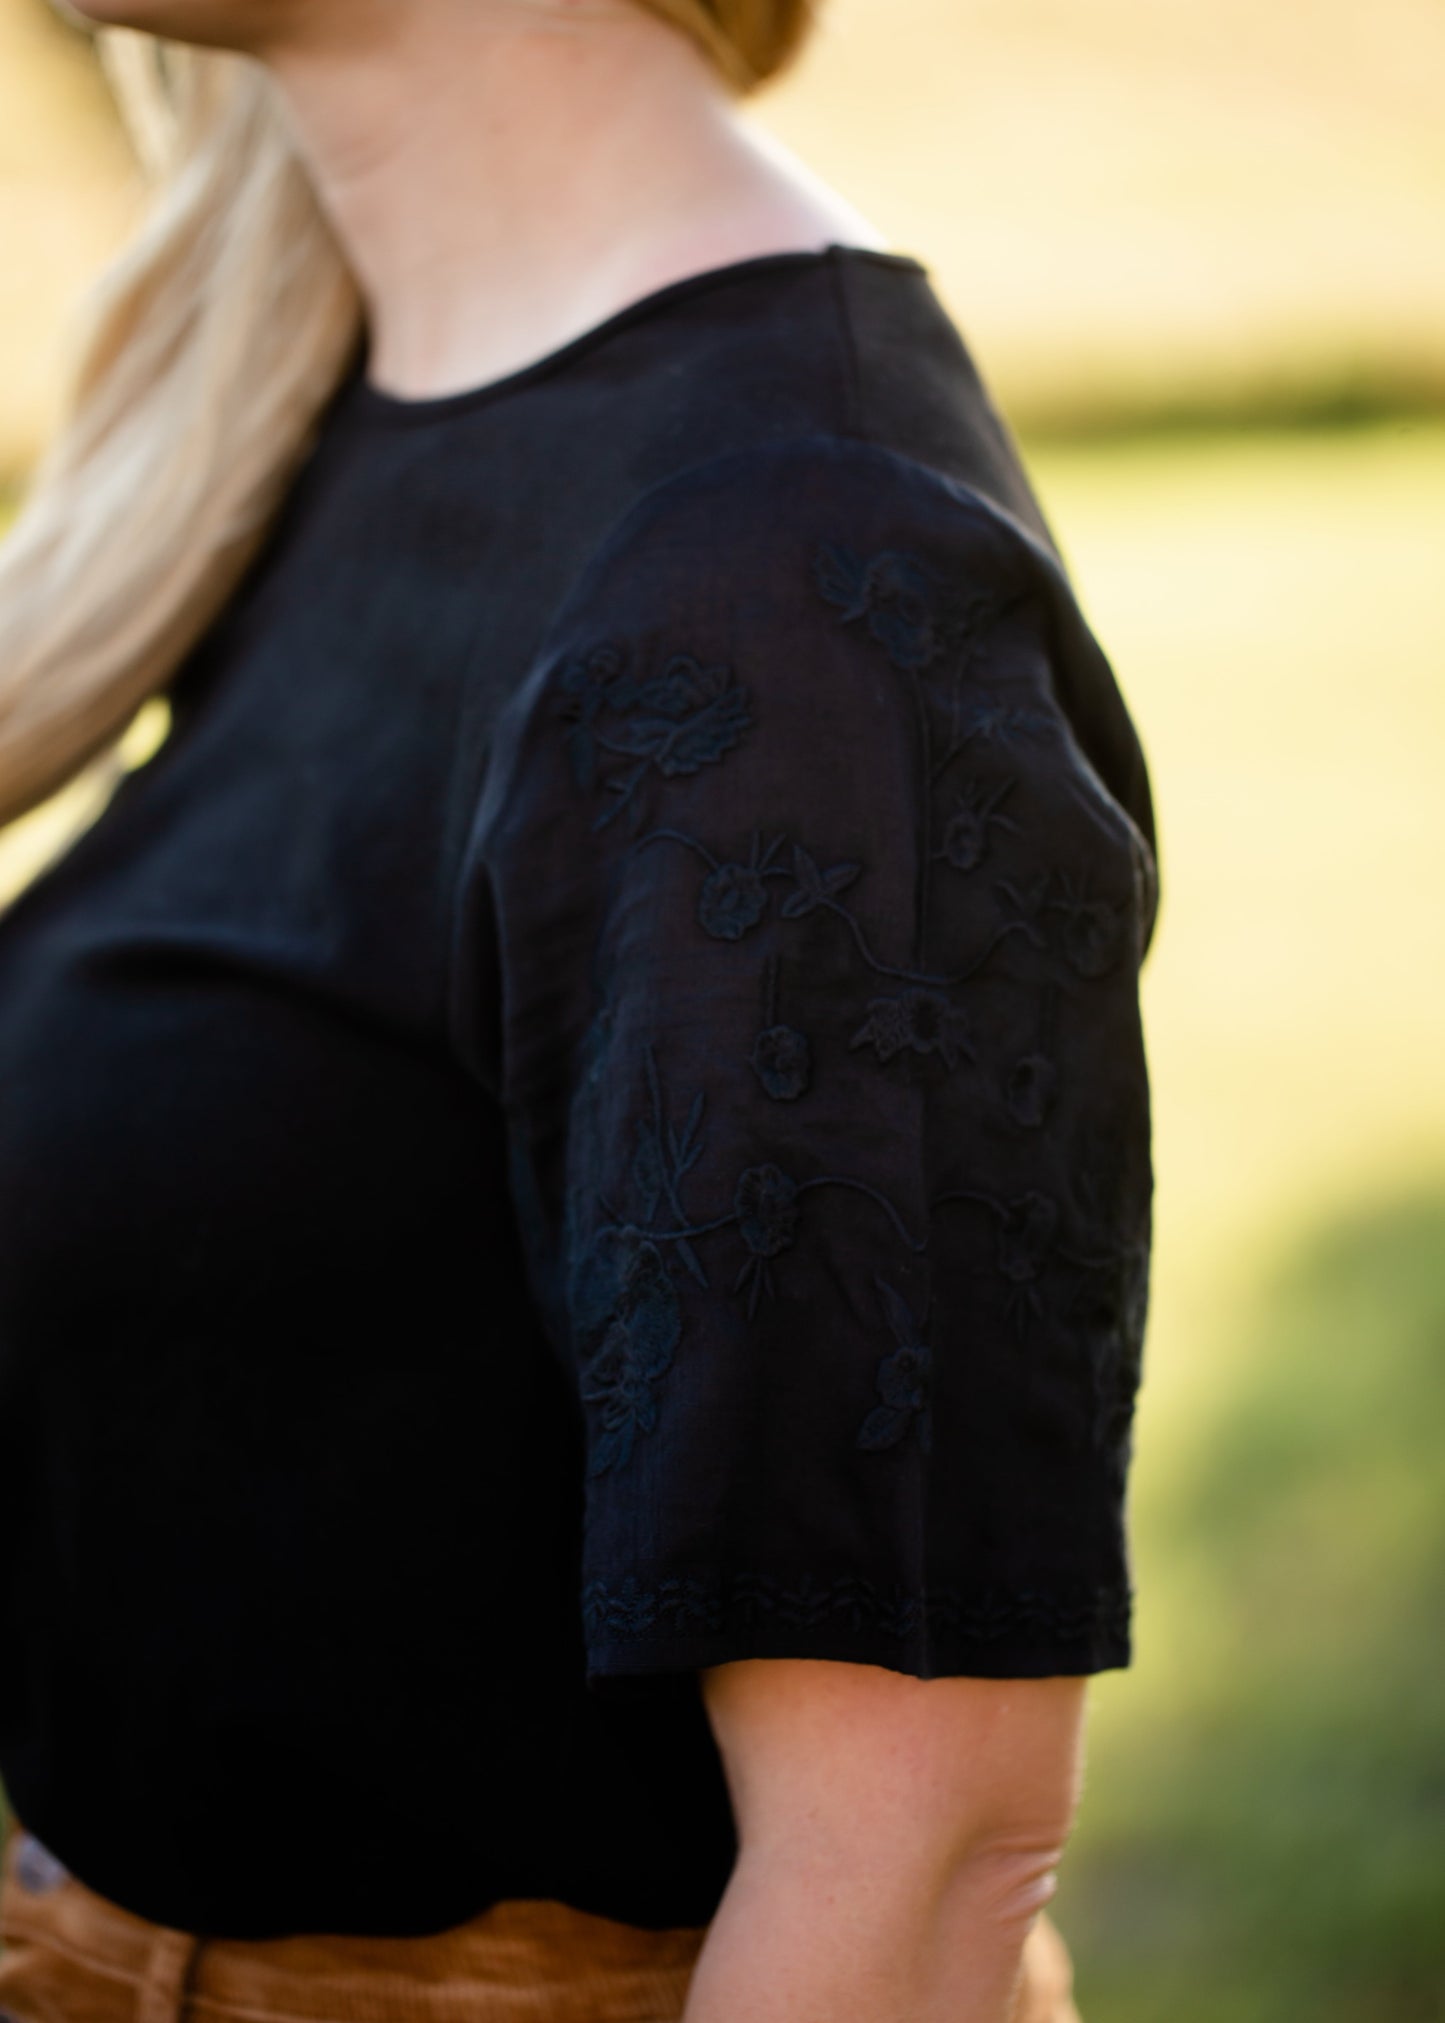 The Elizabeth Embroidered Top is an Inherit Design and we've thought of all the details! There is a lining on the inside of this top so you can feel comfortable. The bell half sleeve has been graced with a feminine floral embroidered pattern and it is cut in a feminine fut. The fabric is light and elevated so you can wear this top anywhere!